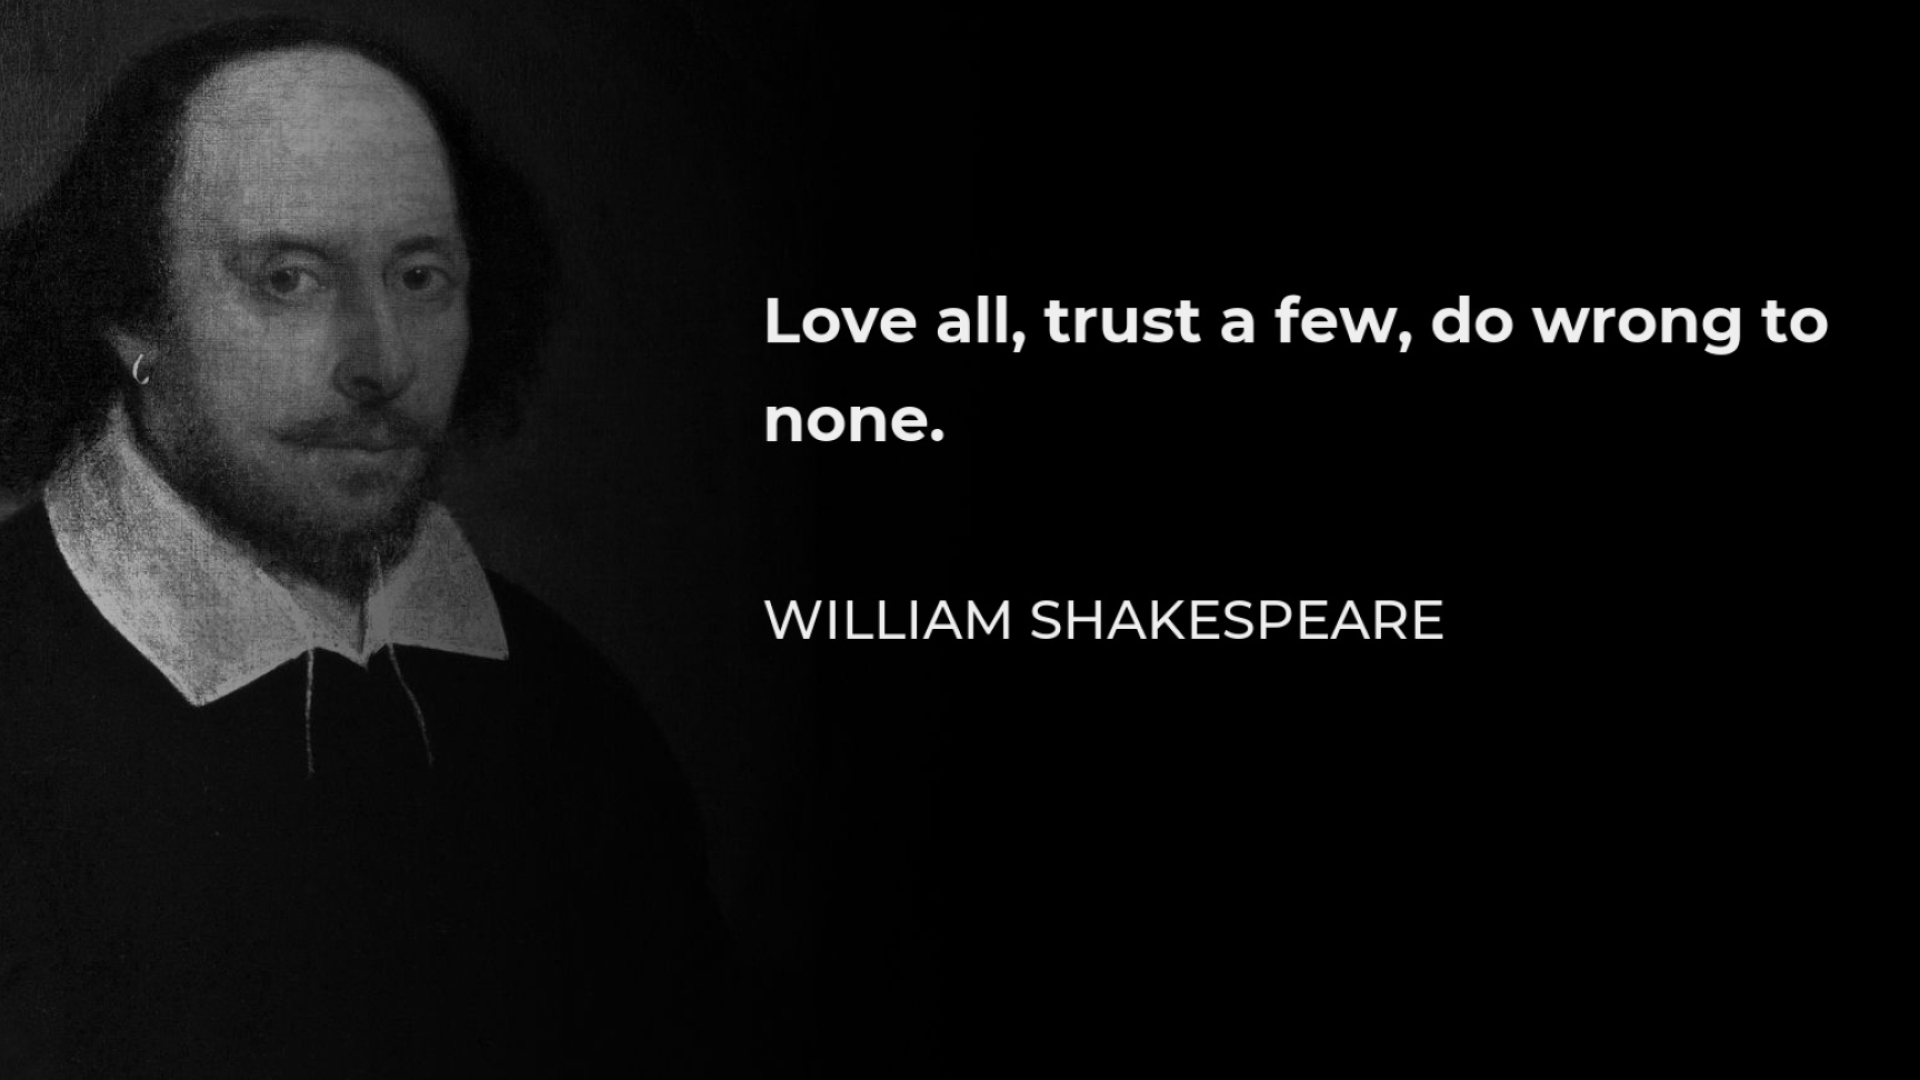 Love all, Trust a few, Wrong to none, Shakespeare quote, 1920x1080 Full HD Desktop